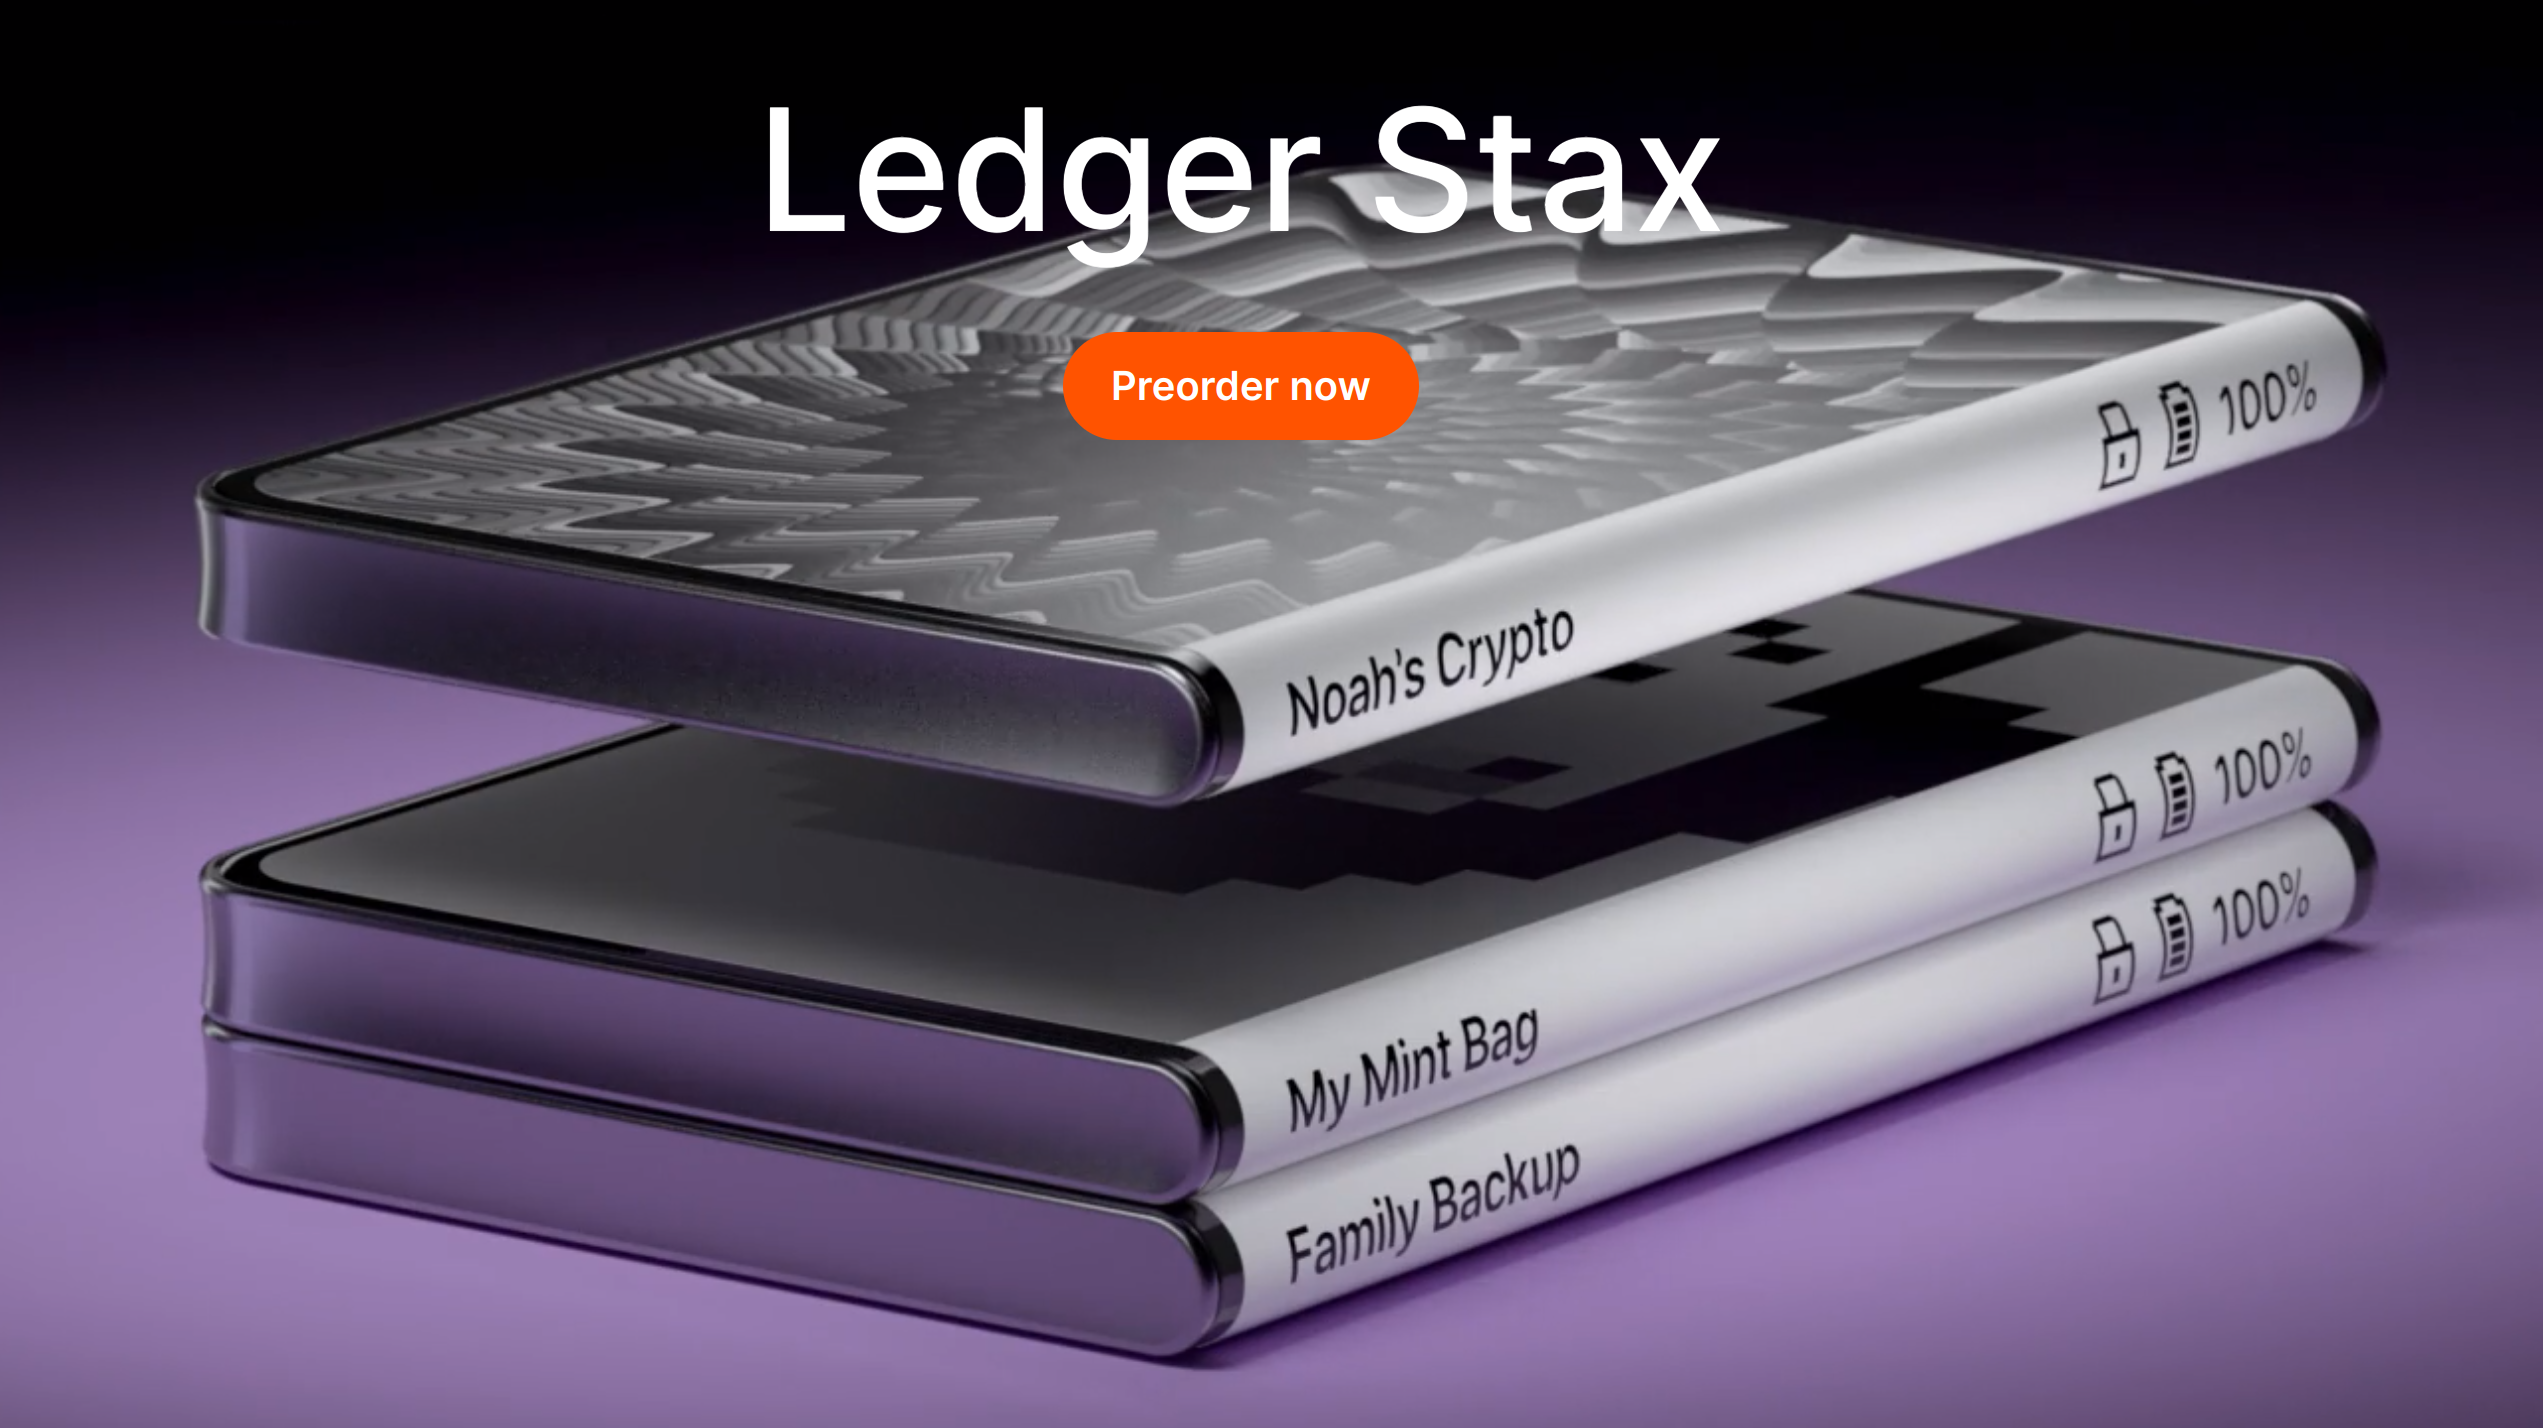 @cryptopi314/ledger-stax-is-out-today-wow